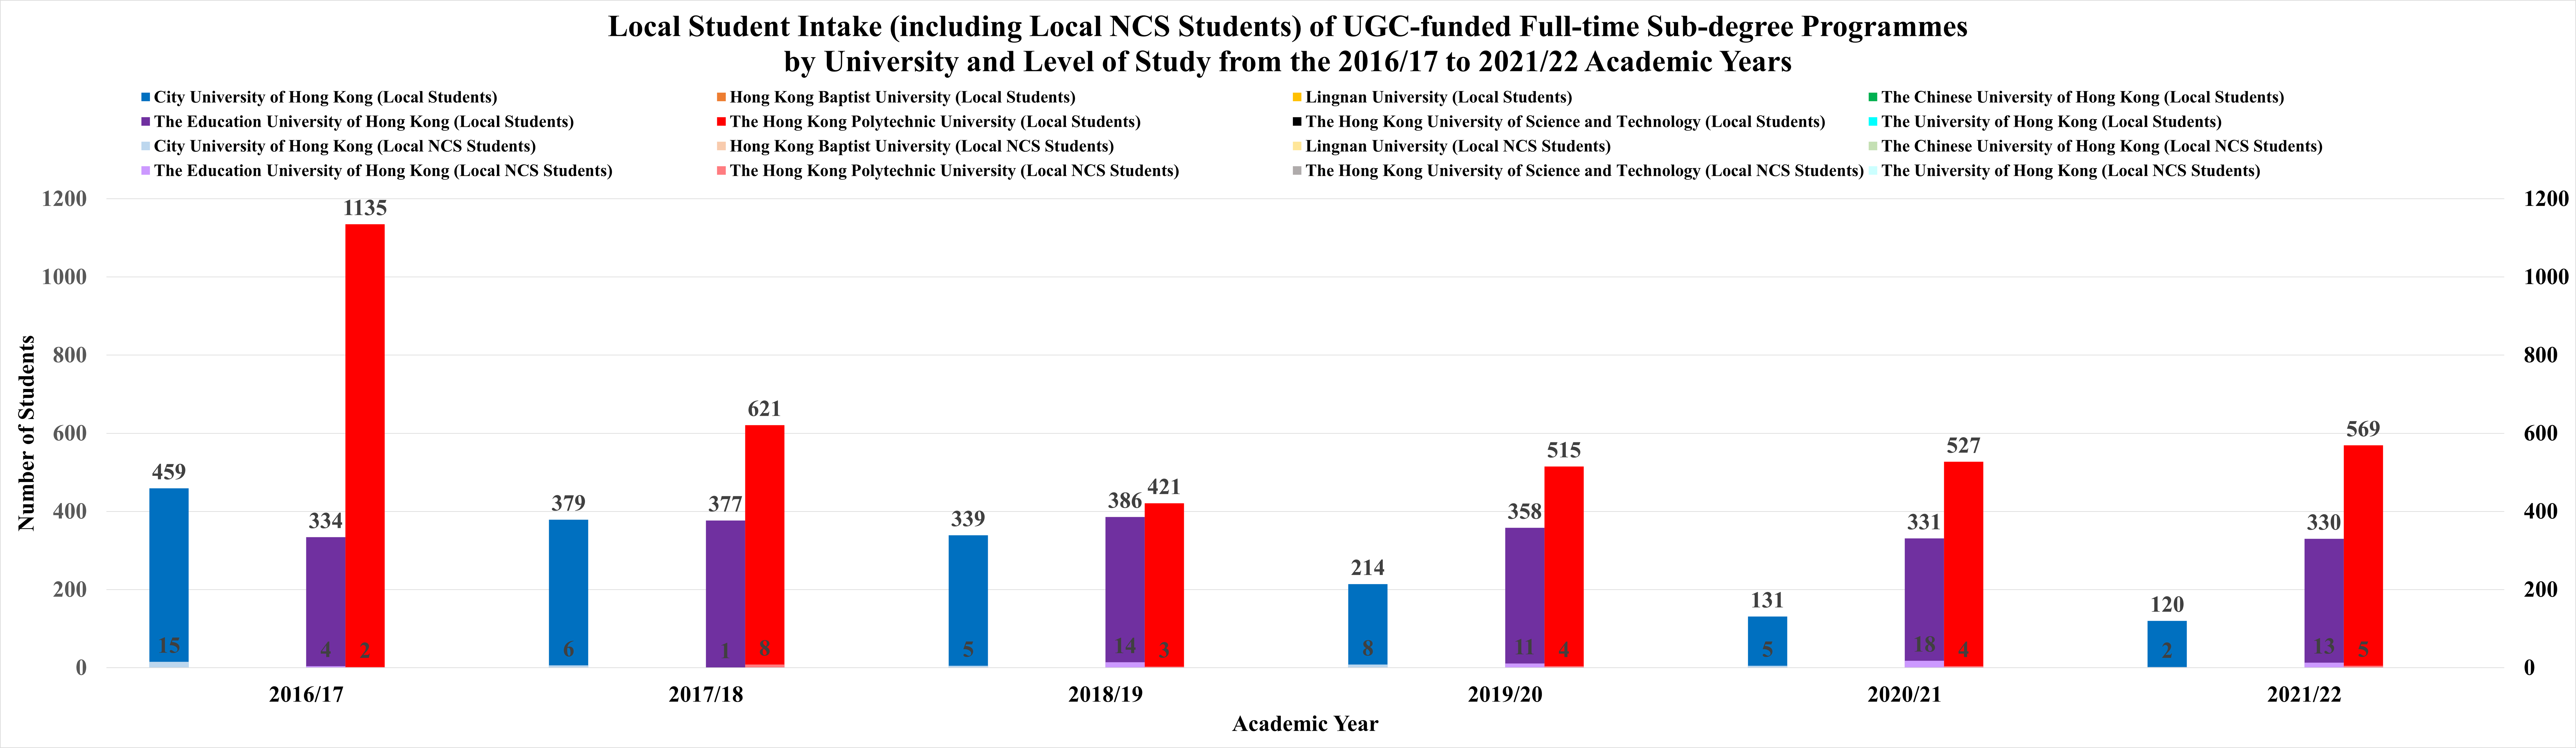 UGC-funded Full-time Sub-degree and Undergraduate Programmes by University and Level of Study